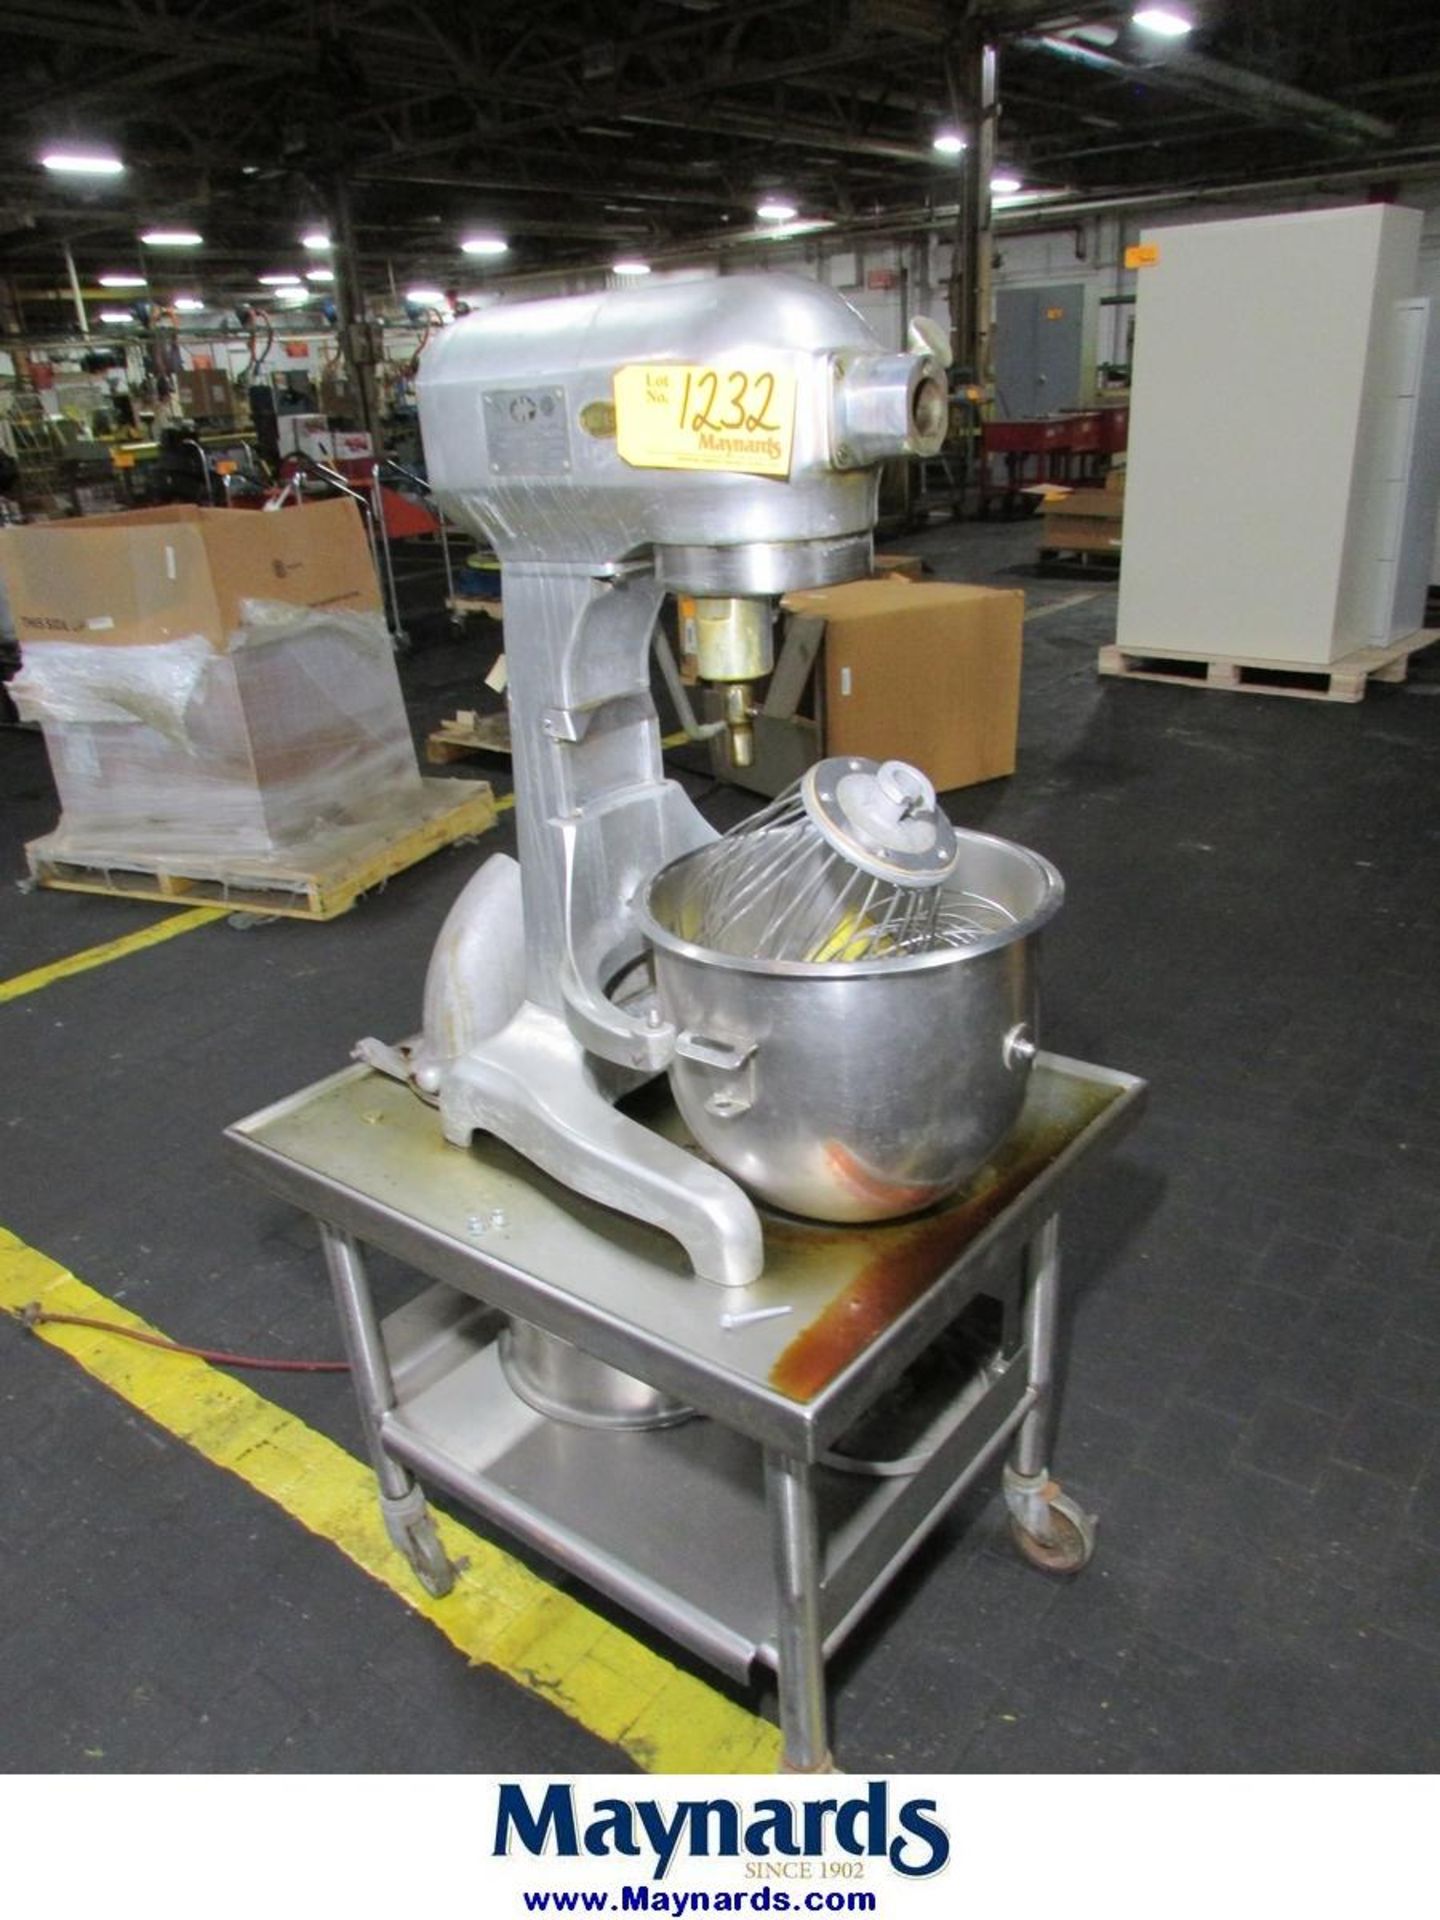 Hobart AS-200-DT Stainless Steel Commercial Mixer